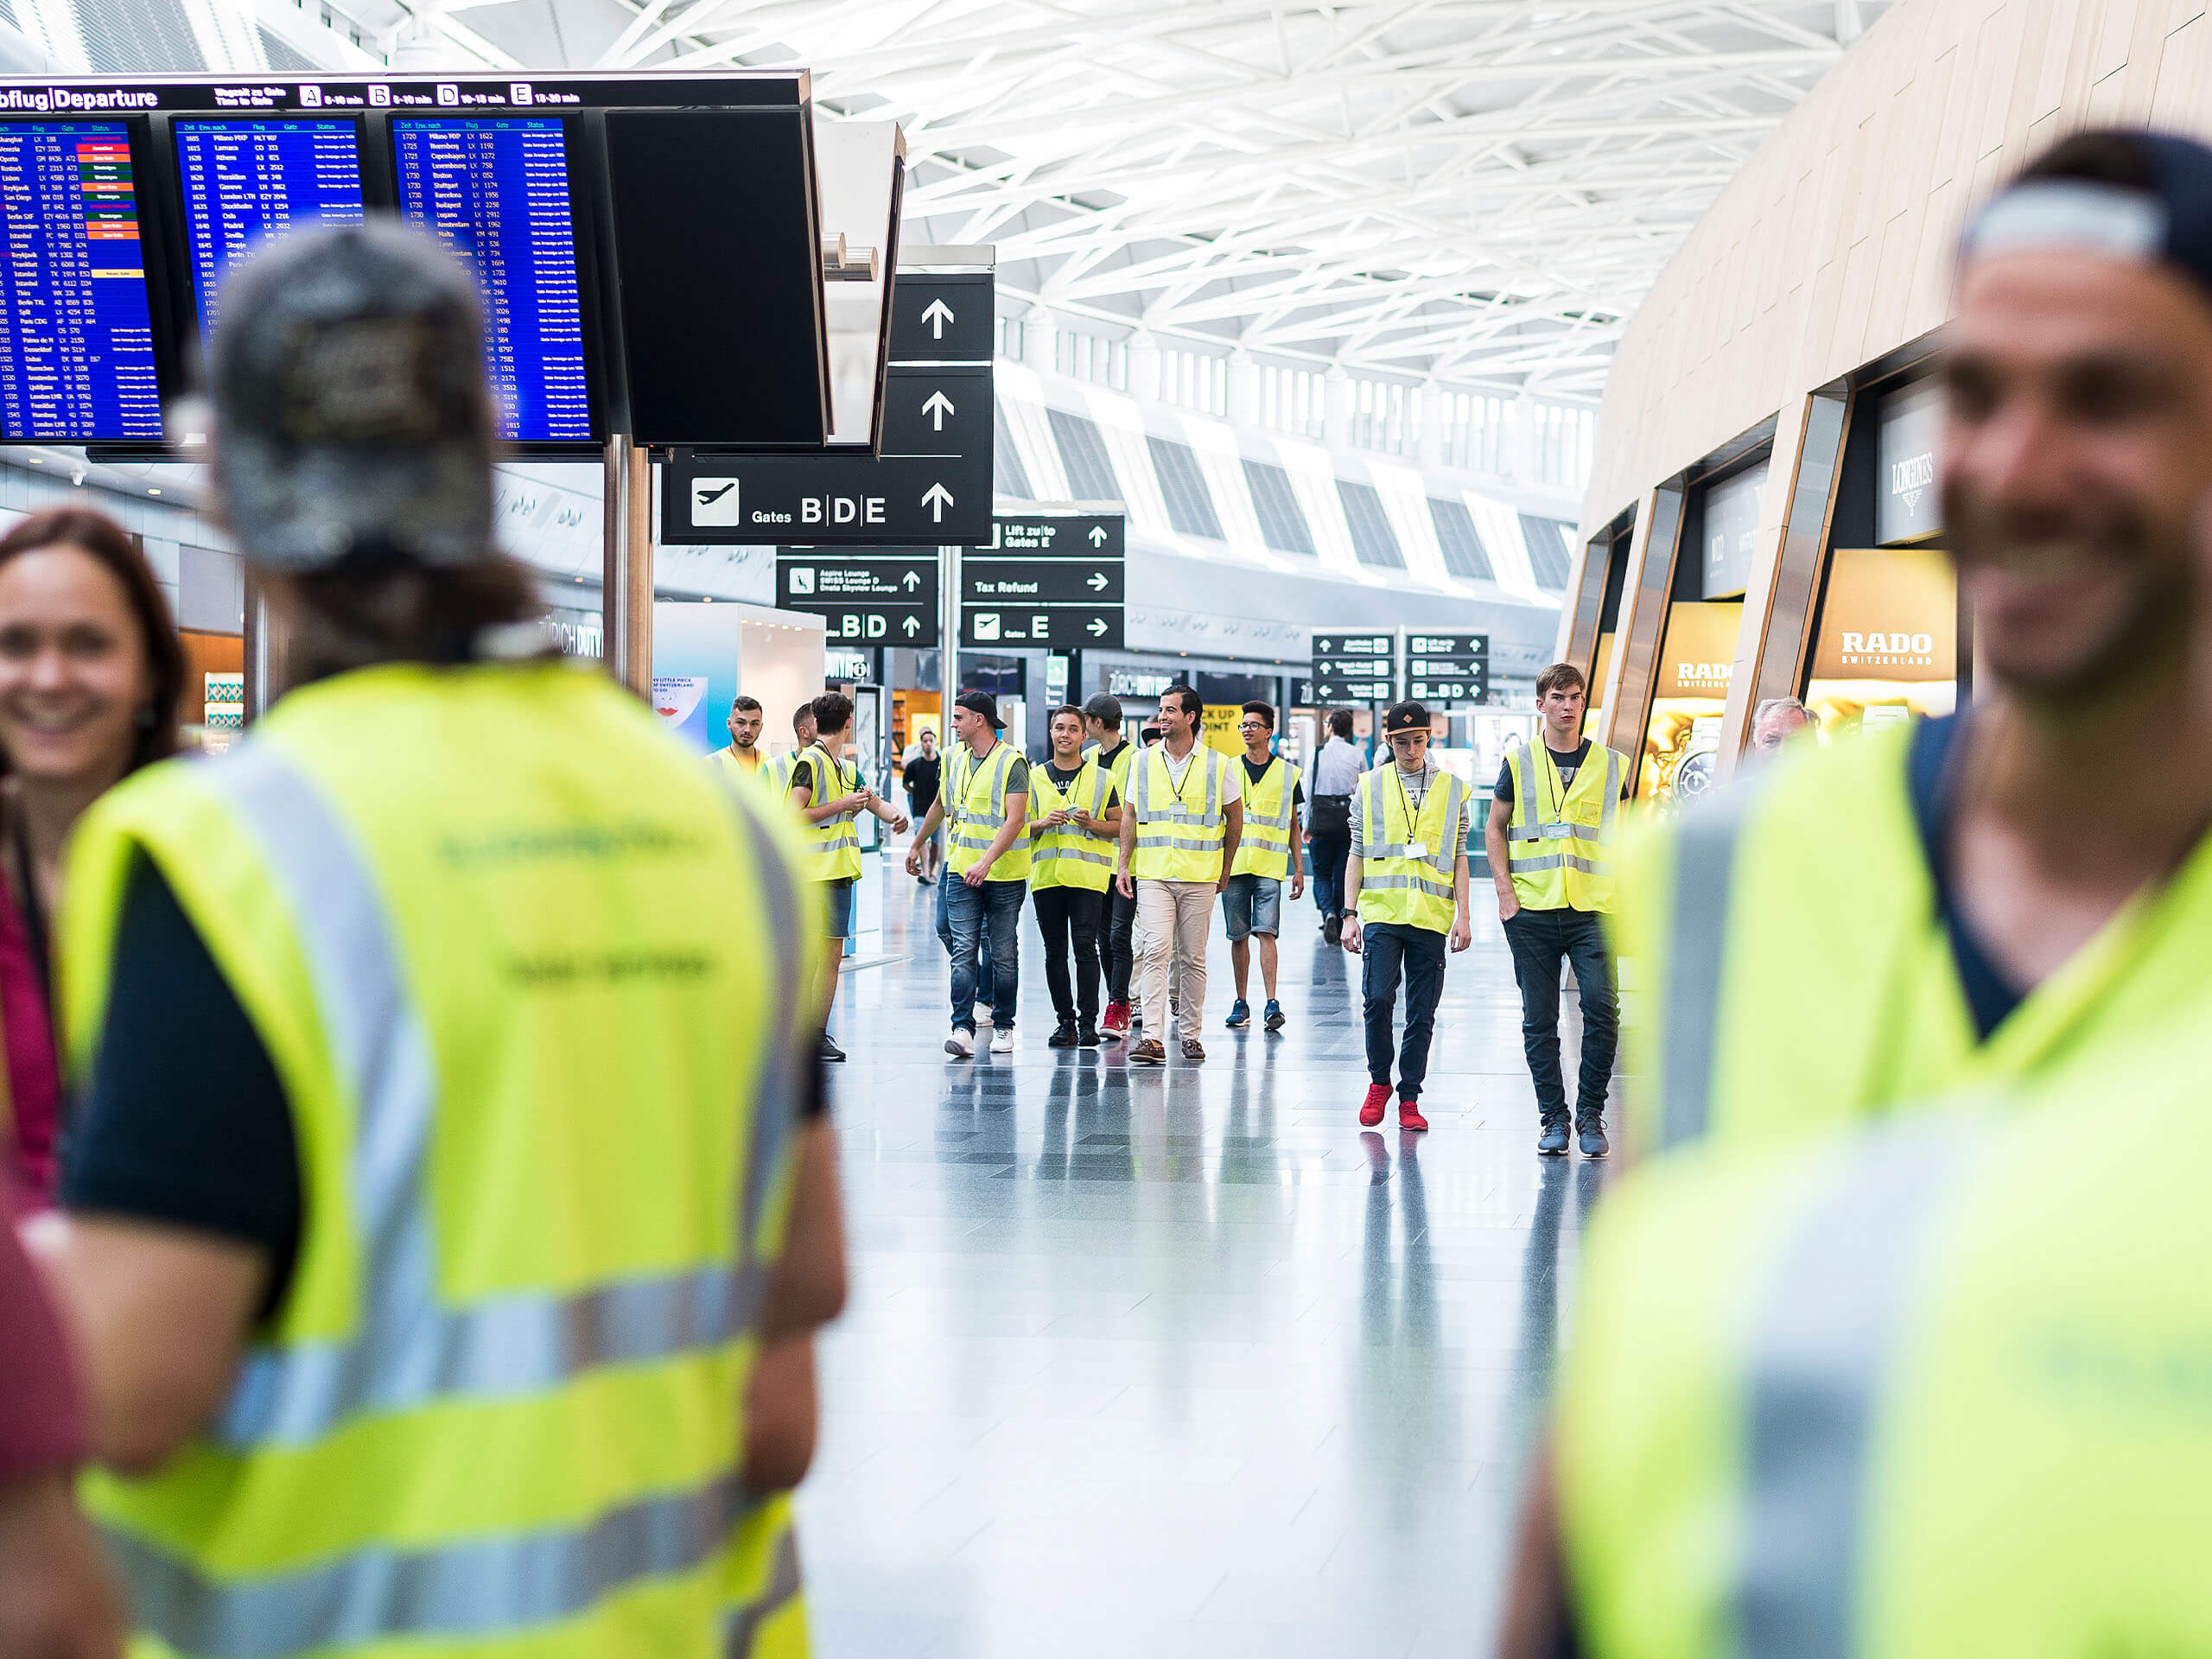 Group of people on a guided airport tour